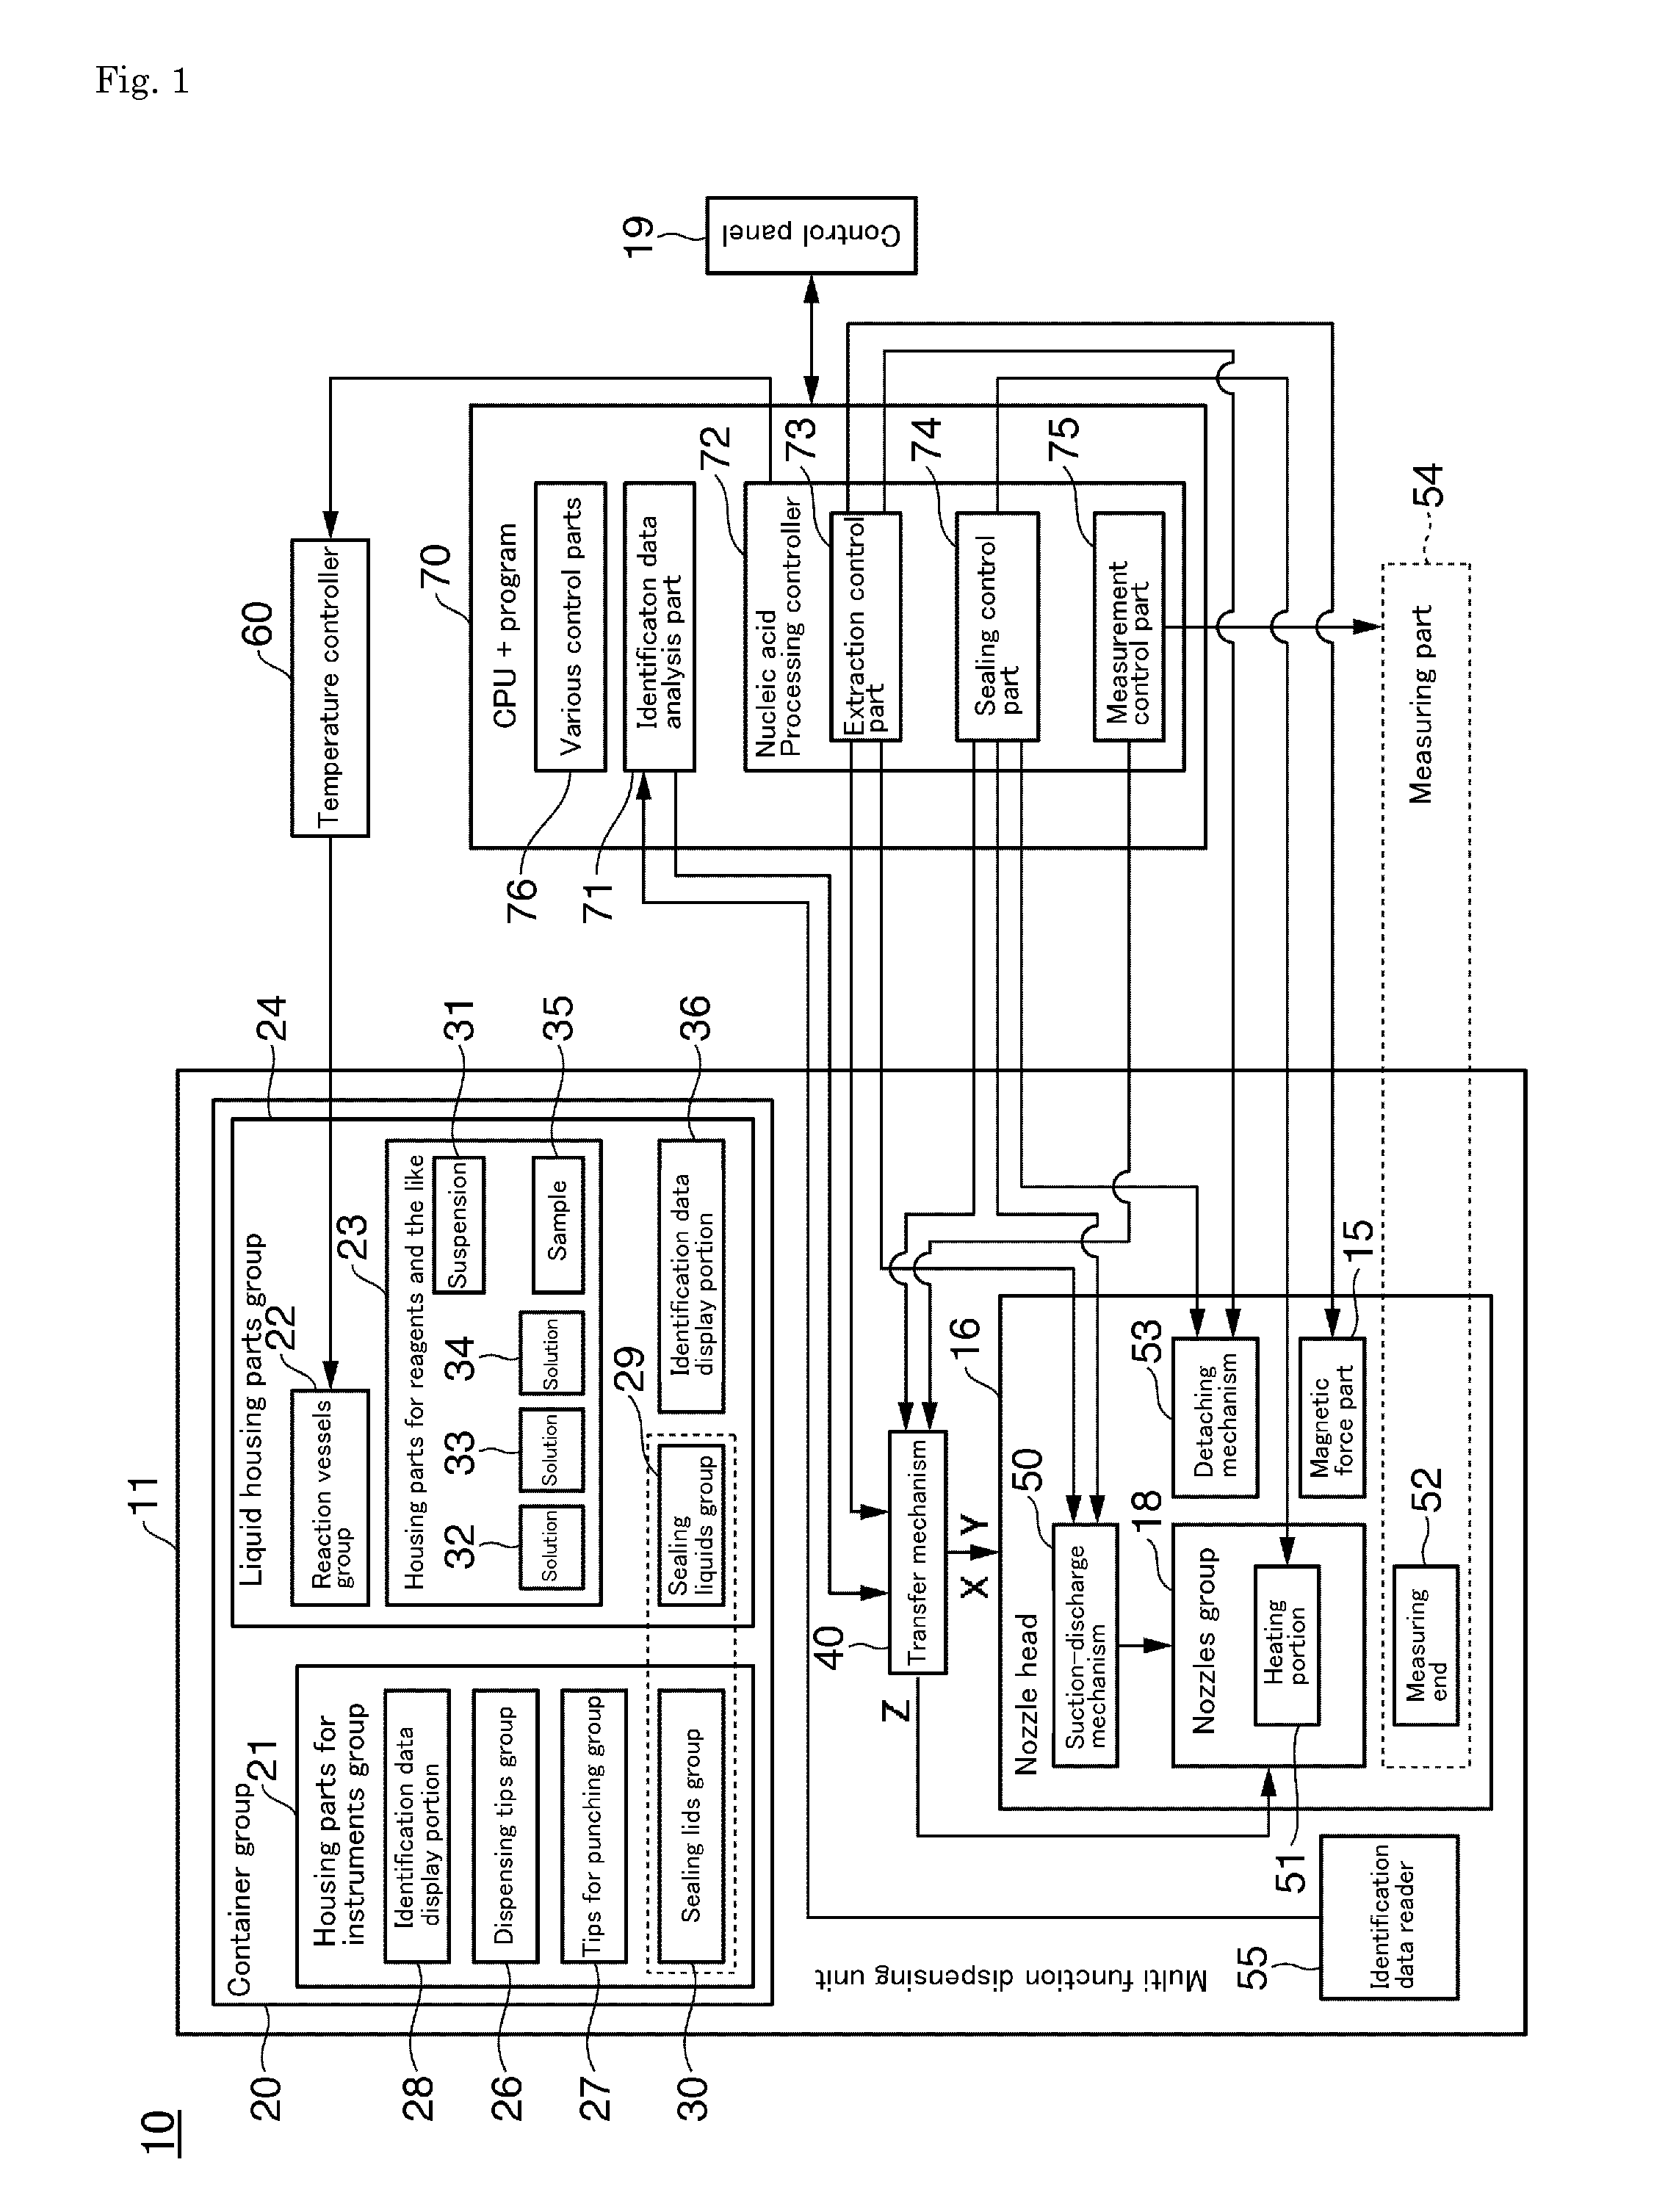 Automated nucleic acid processor and automated nucleic acid processing method using multi function dispensing unit